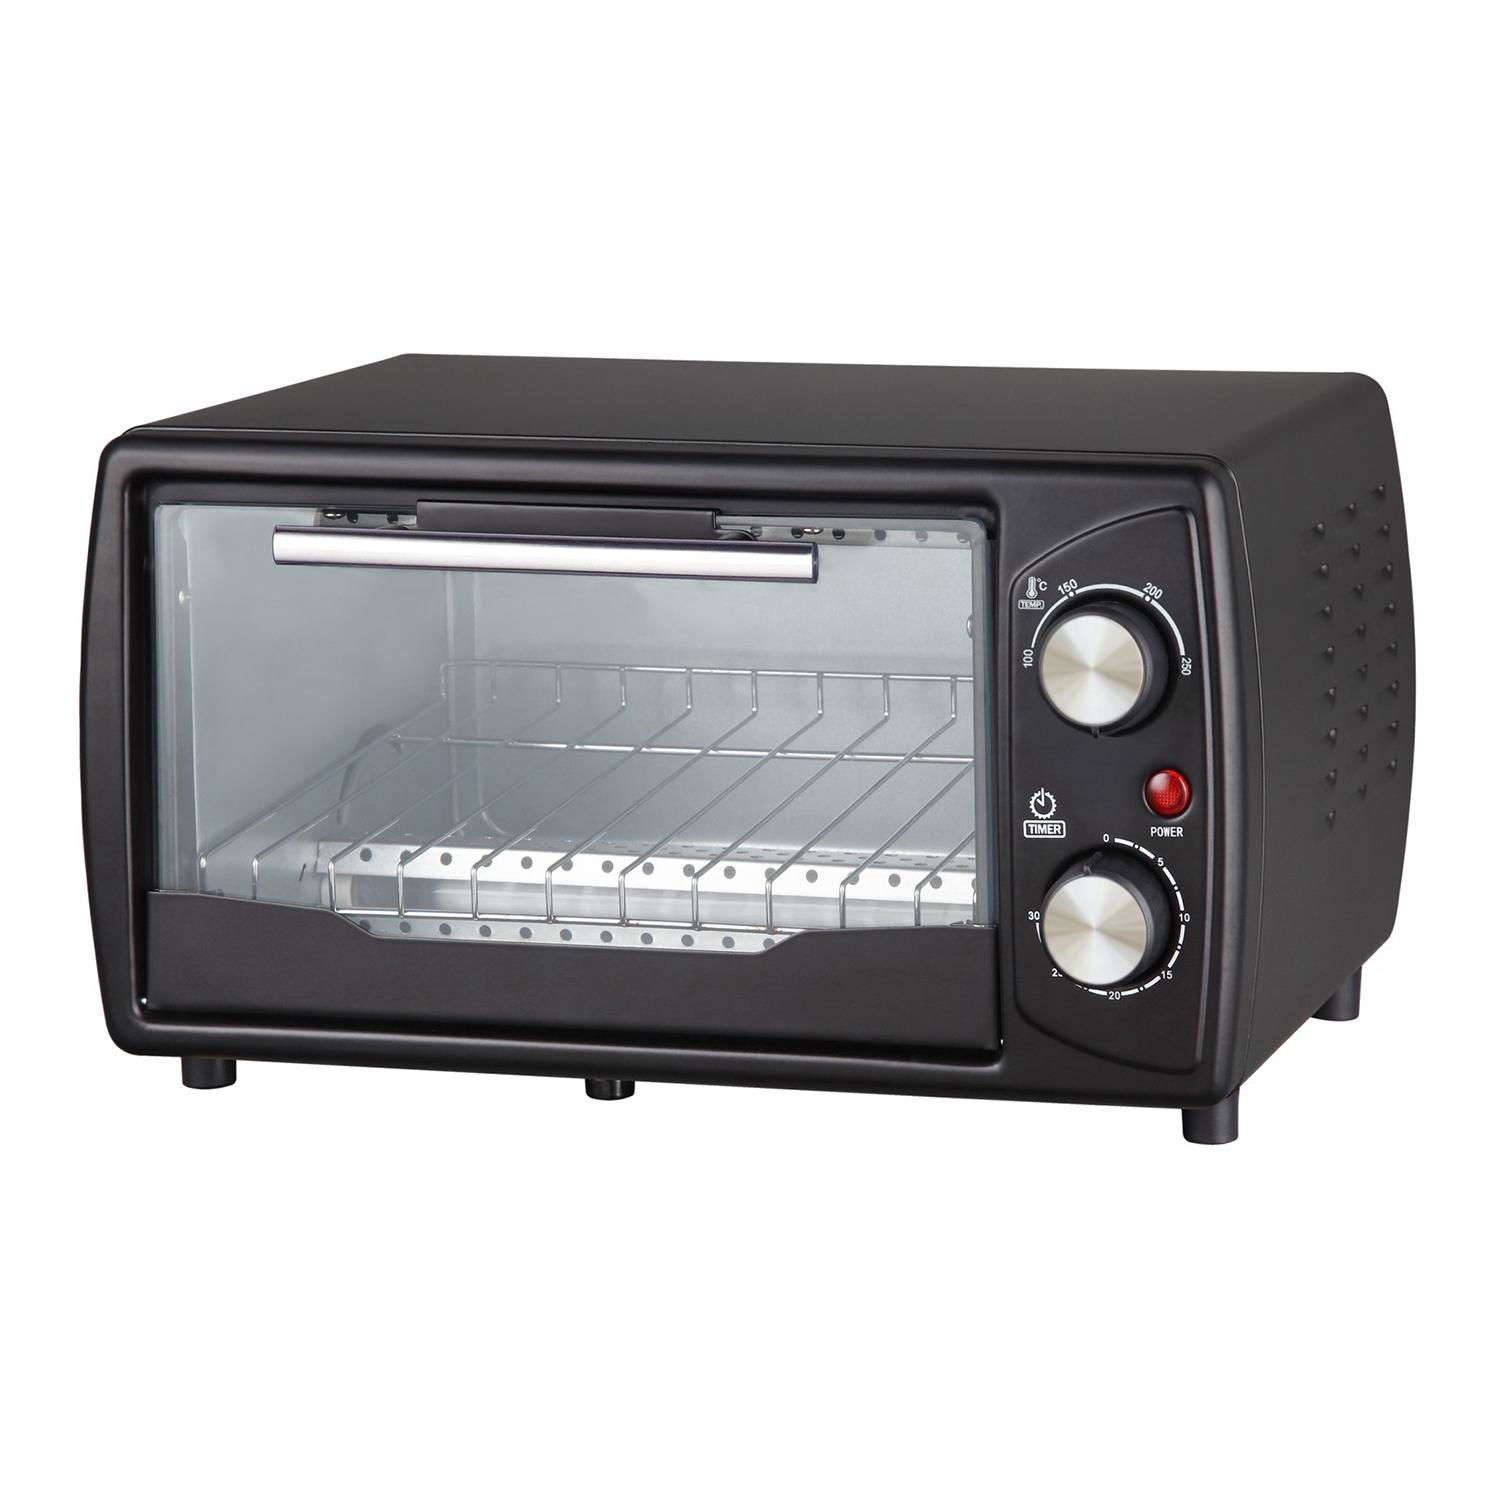 9L mini basic electric oven toaster bread baking oven 